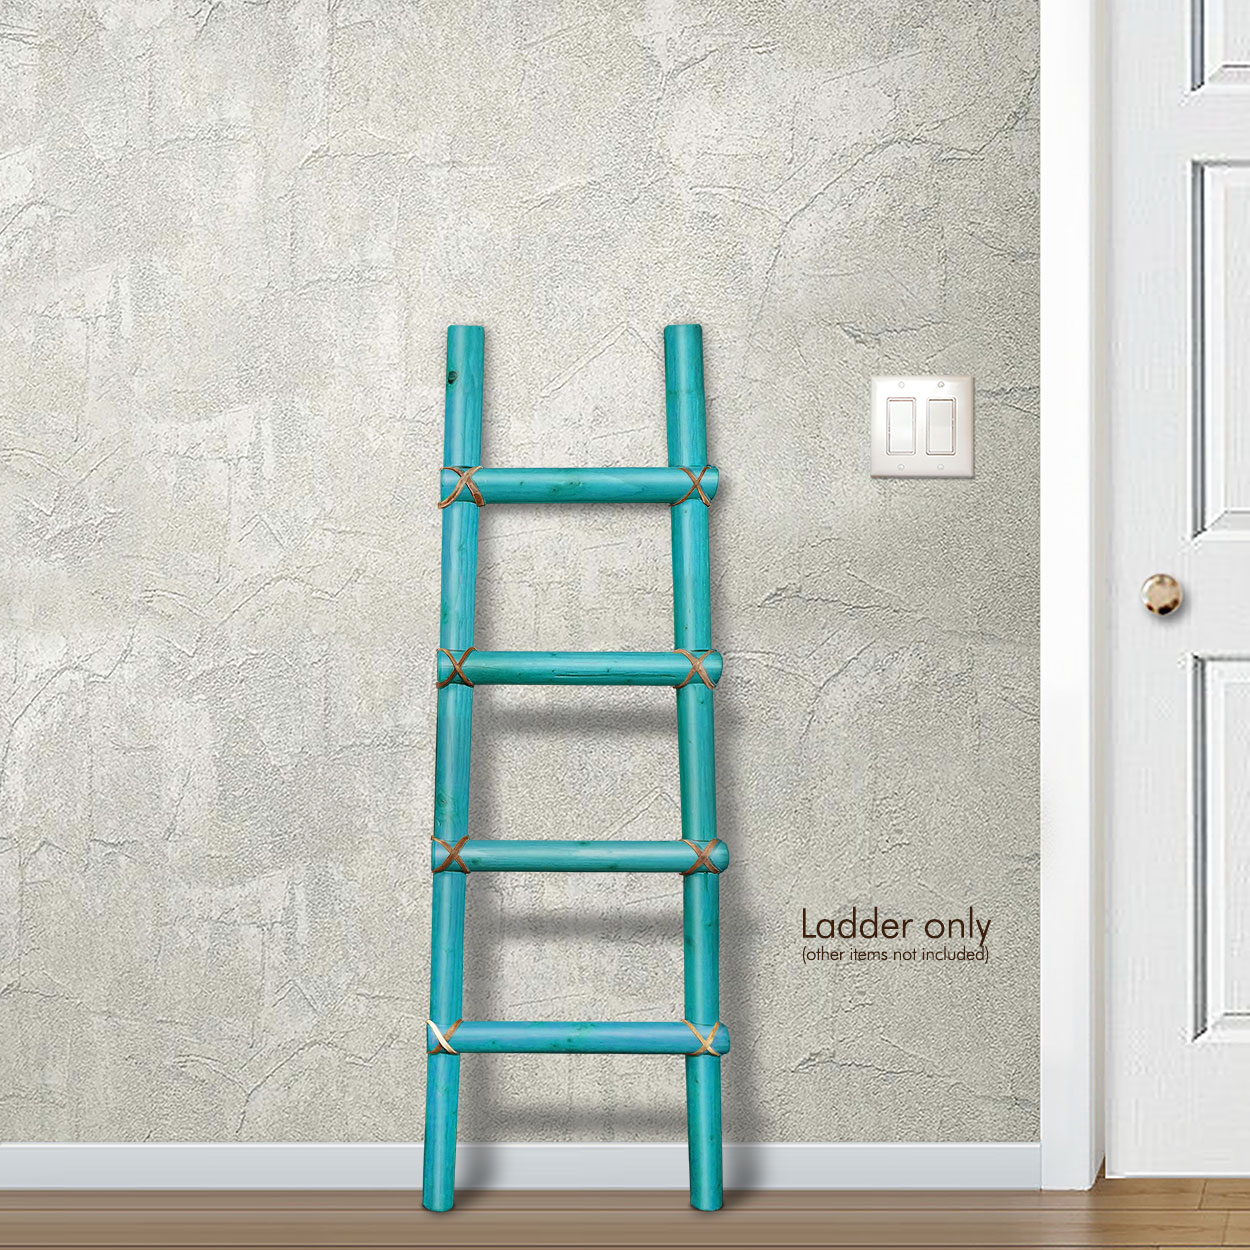 460244 - Art Crafted in Arizona - 36in Decorative Wooden Kiva Ladder in Turquoise Finish